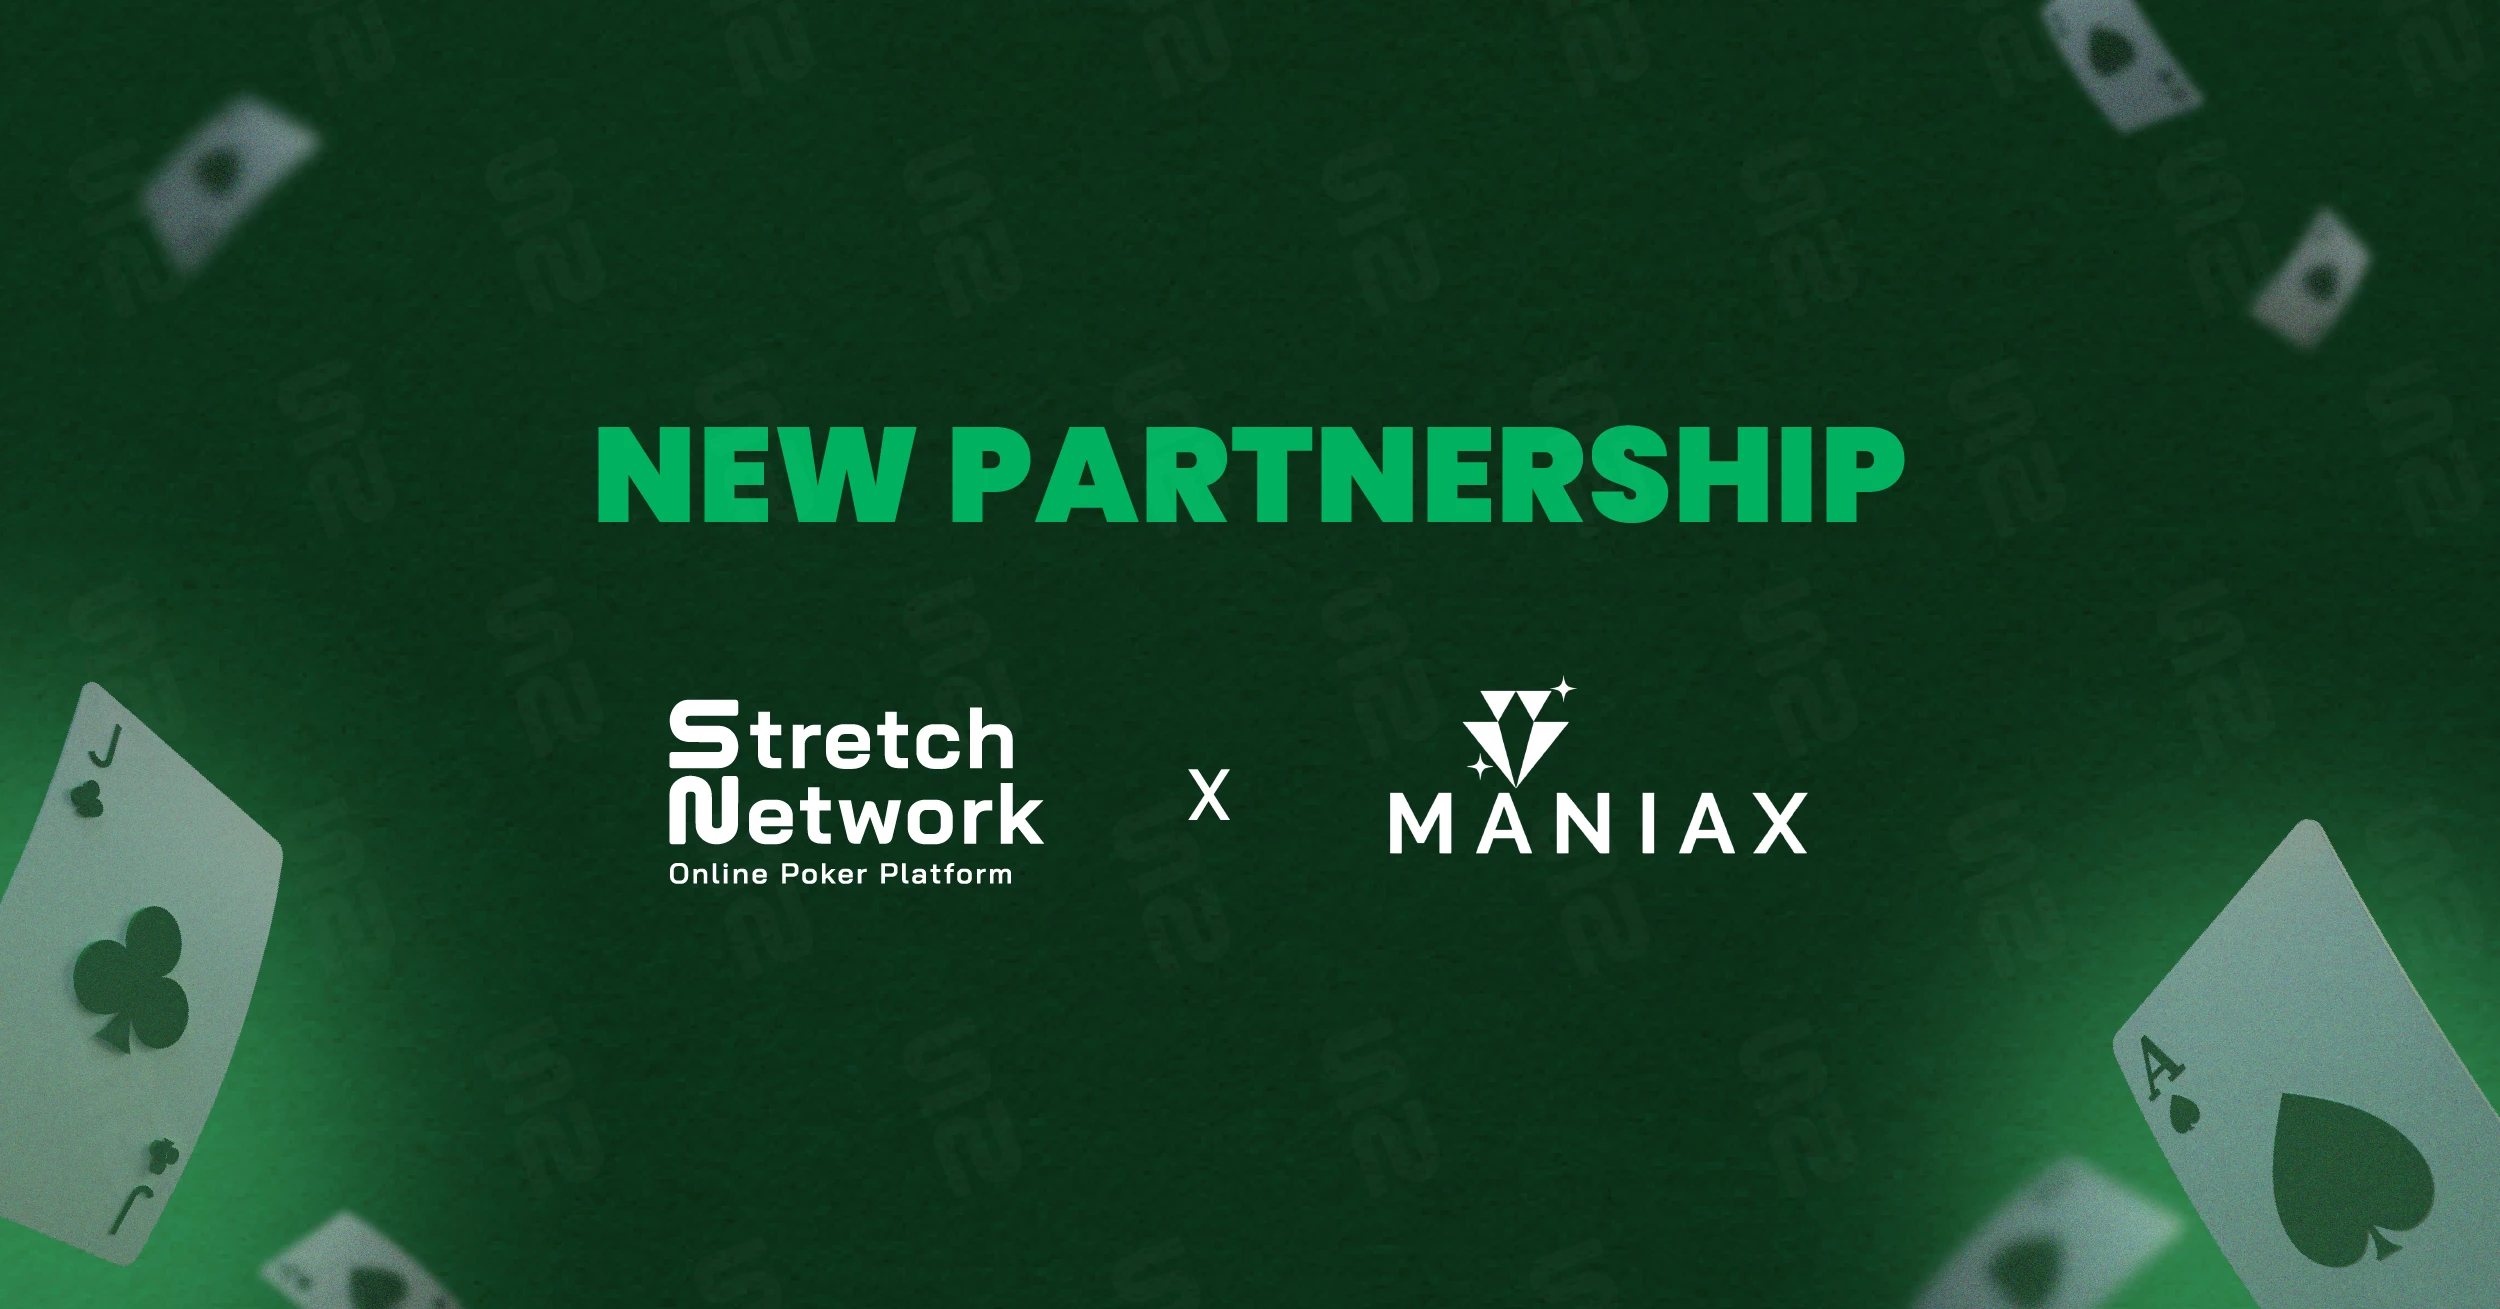 We are expanding our horizons through new partnerships. 